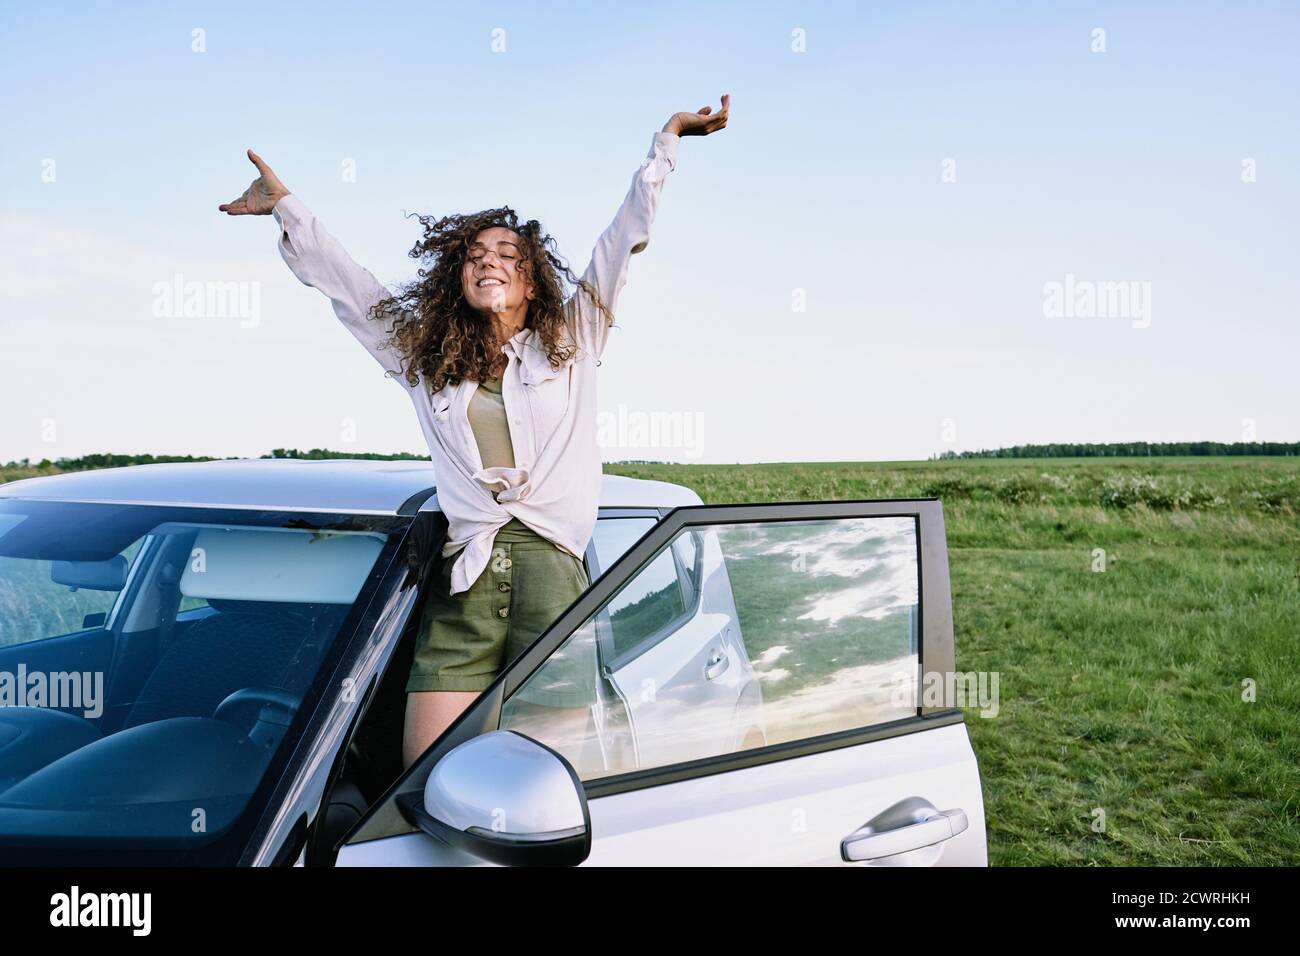 Ecstatic curly-haired girl in casual shirt raising arms and standing on car sill while having fun during car trip Stock Photo